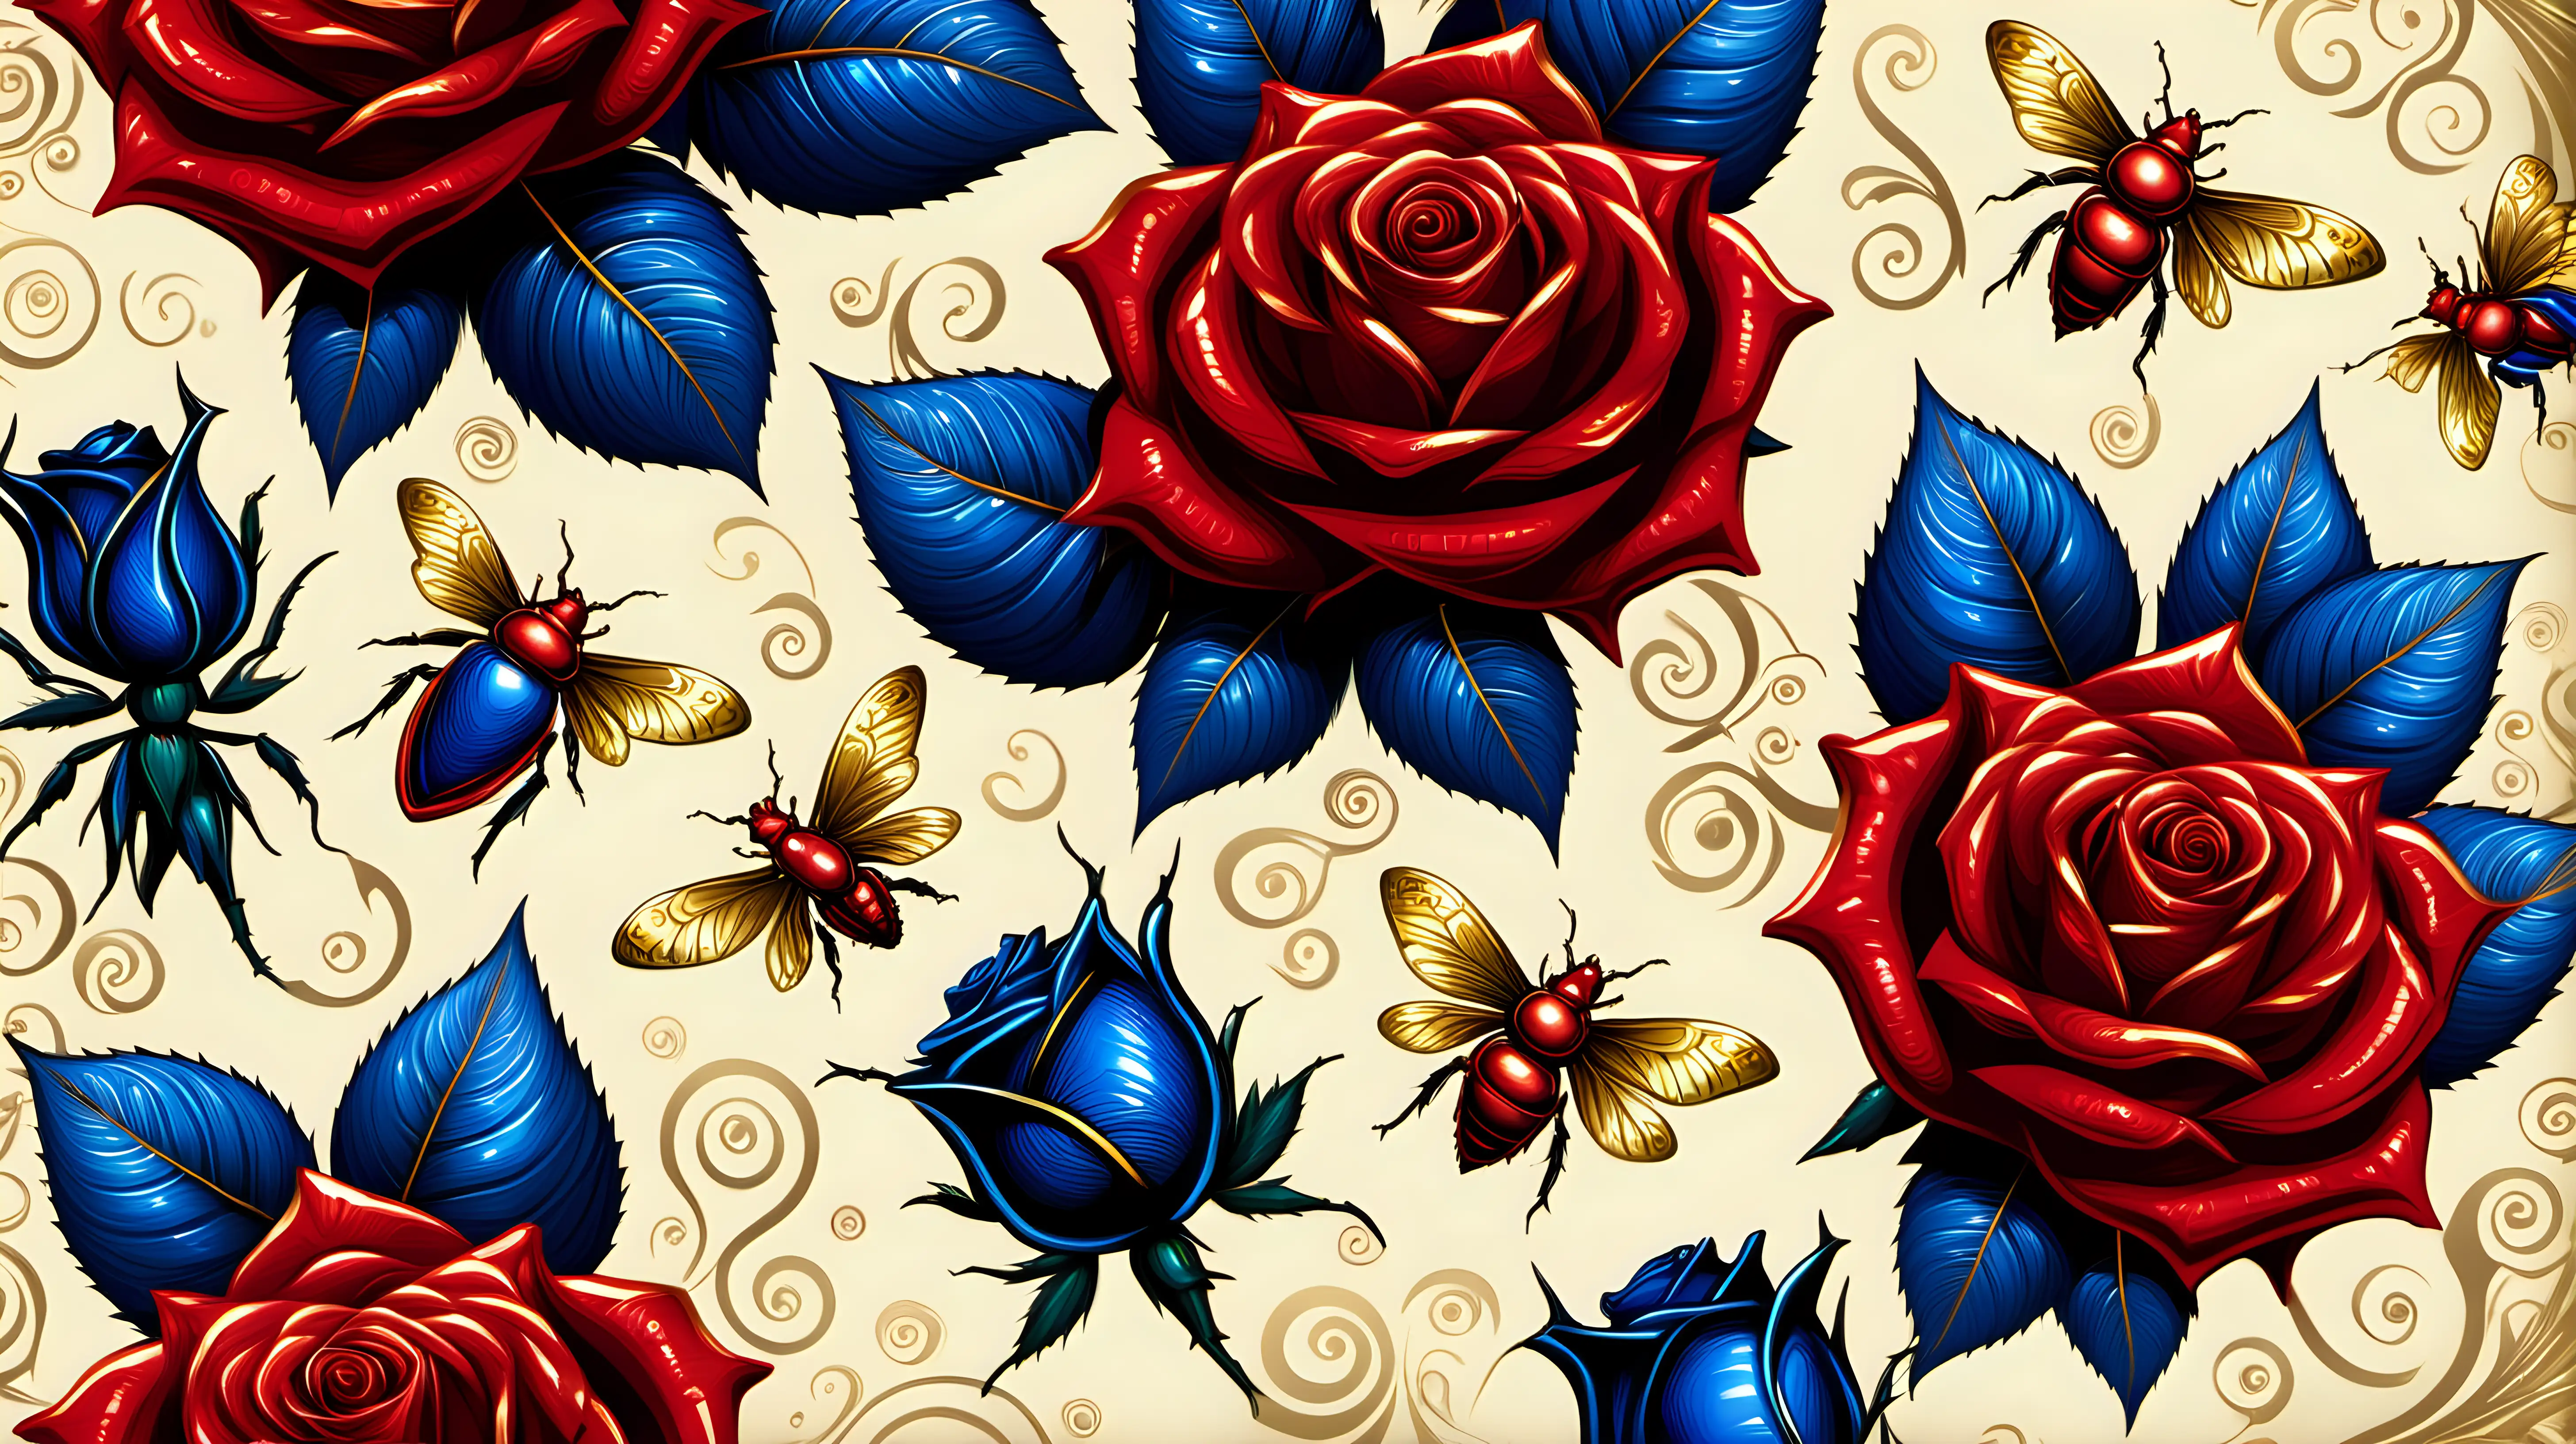 Vibrant Red and Blue Roses with Golden Bug Pattern